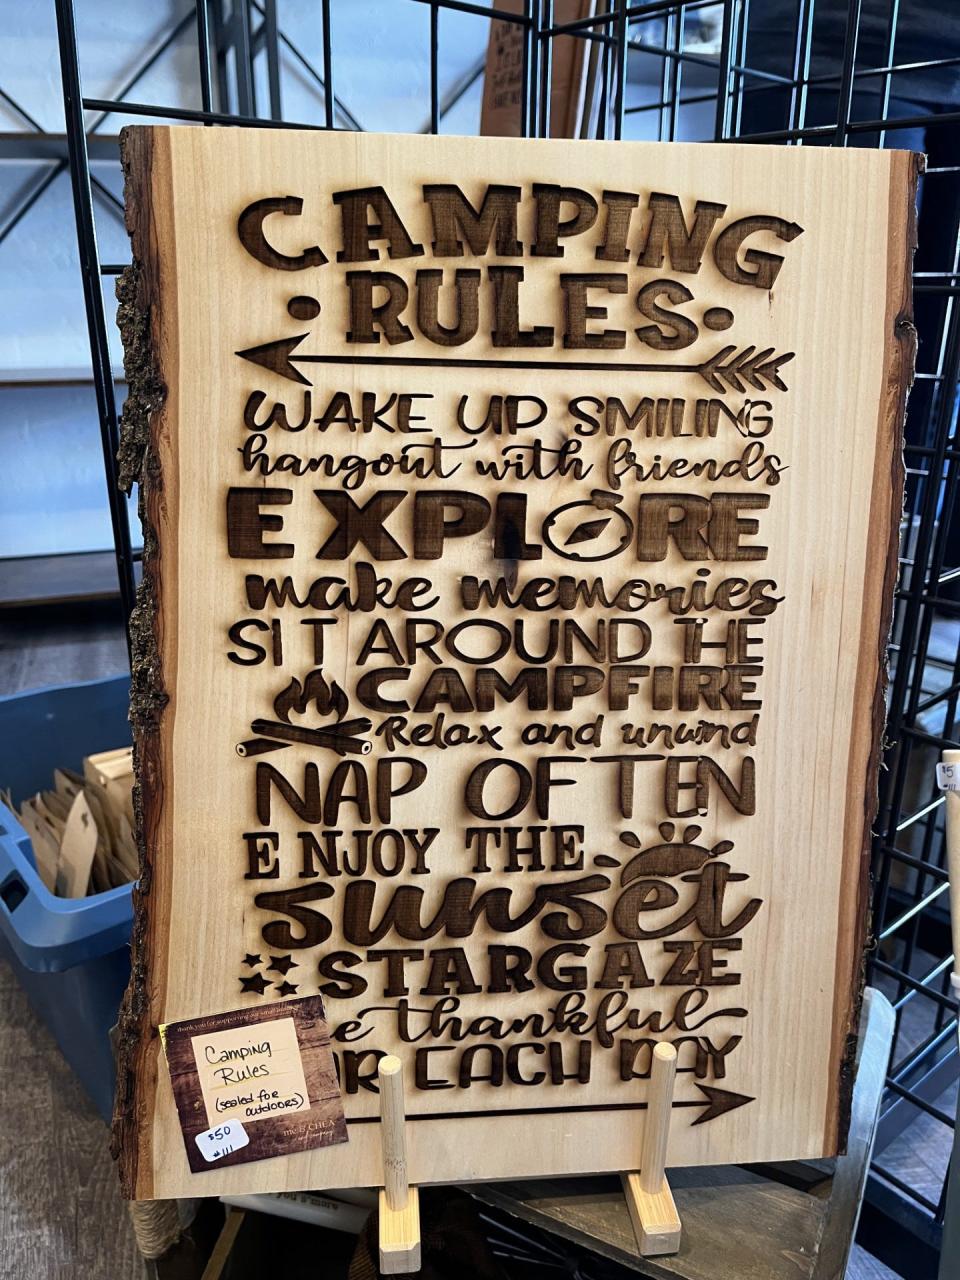 A laser engraved wood sign by Me & CHEA and company, as seen, Wednesday, May 8 in Sheboygan, Wis.